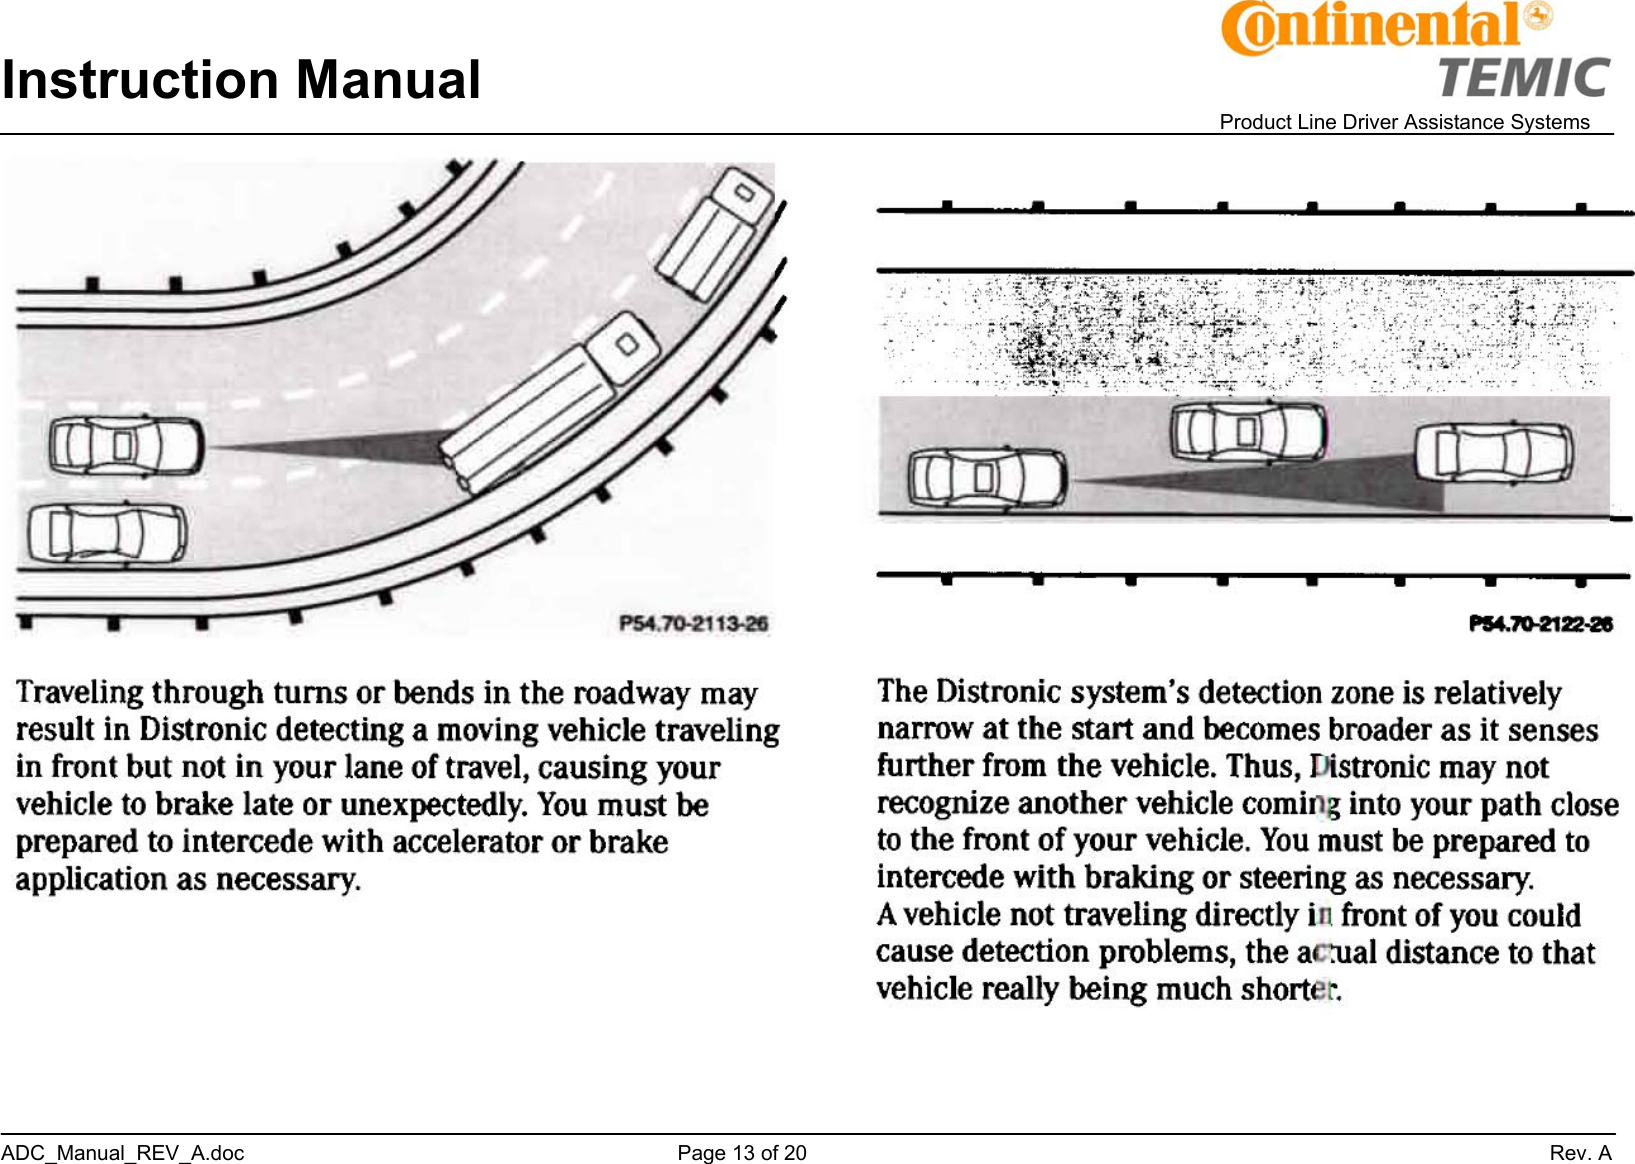 Instruction Manual    Product Line Driver Assistance Systems ADC_Manual_REV_A.doc     Page 13 of 20                 Rev. A   